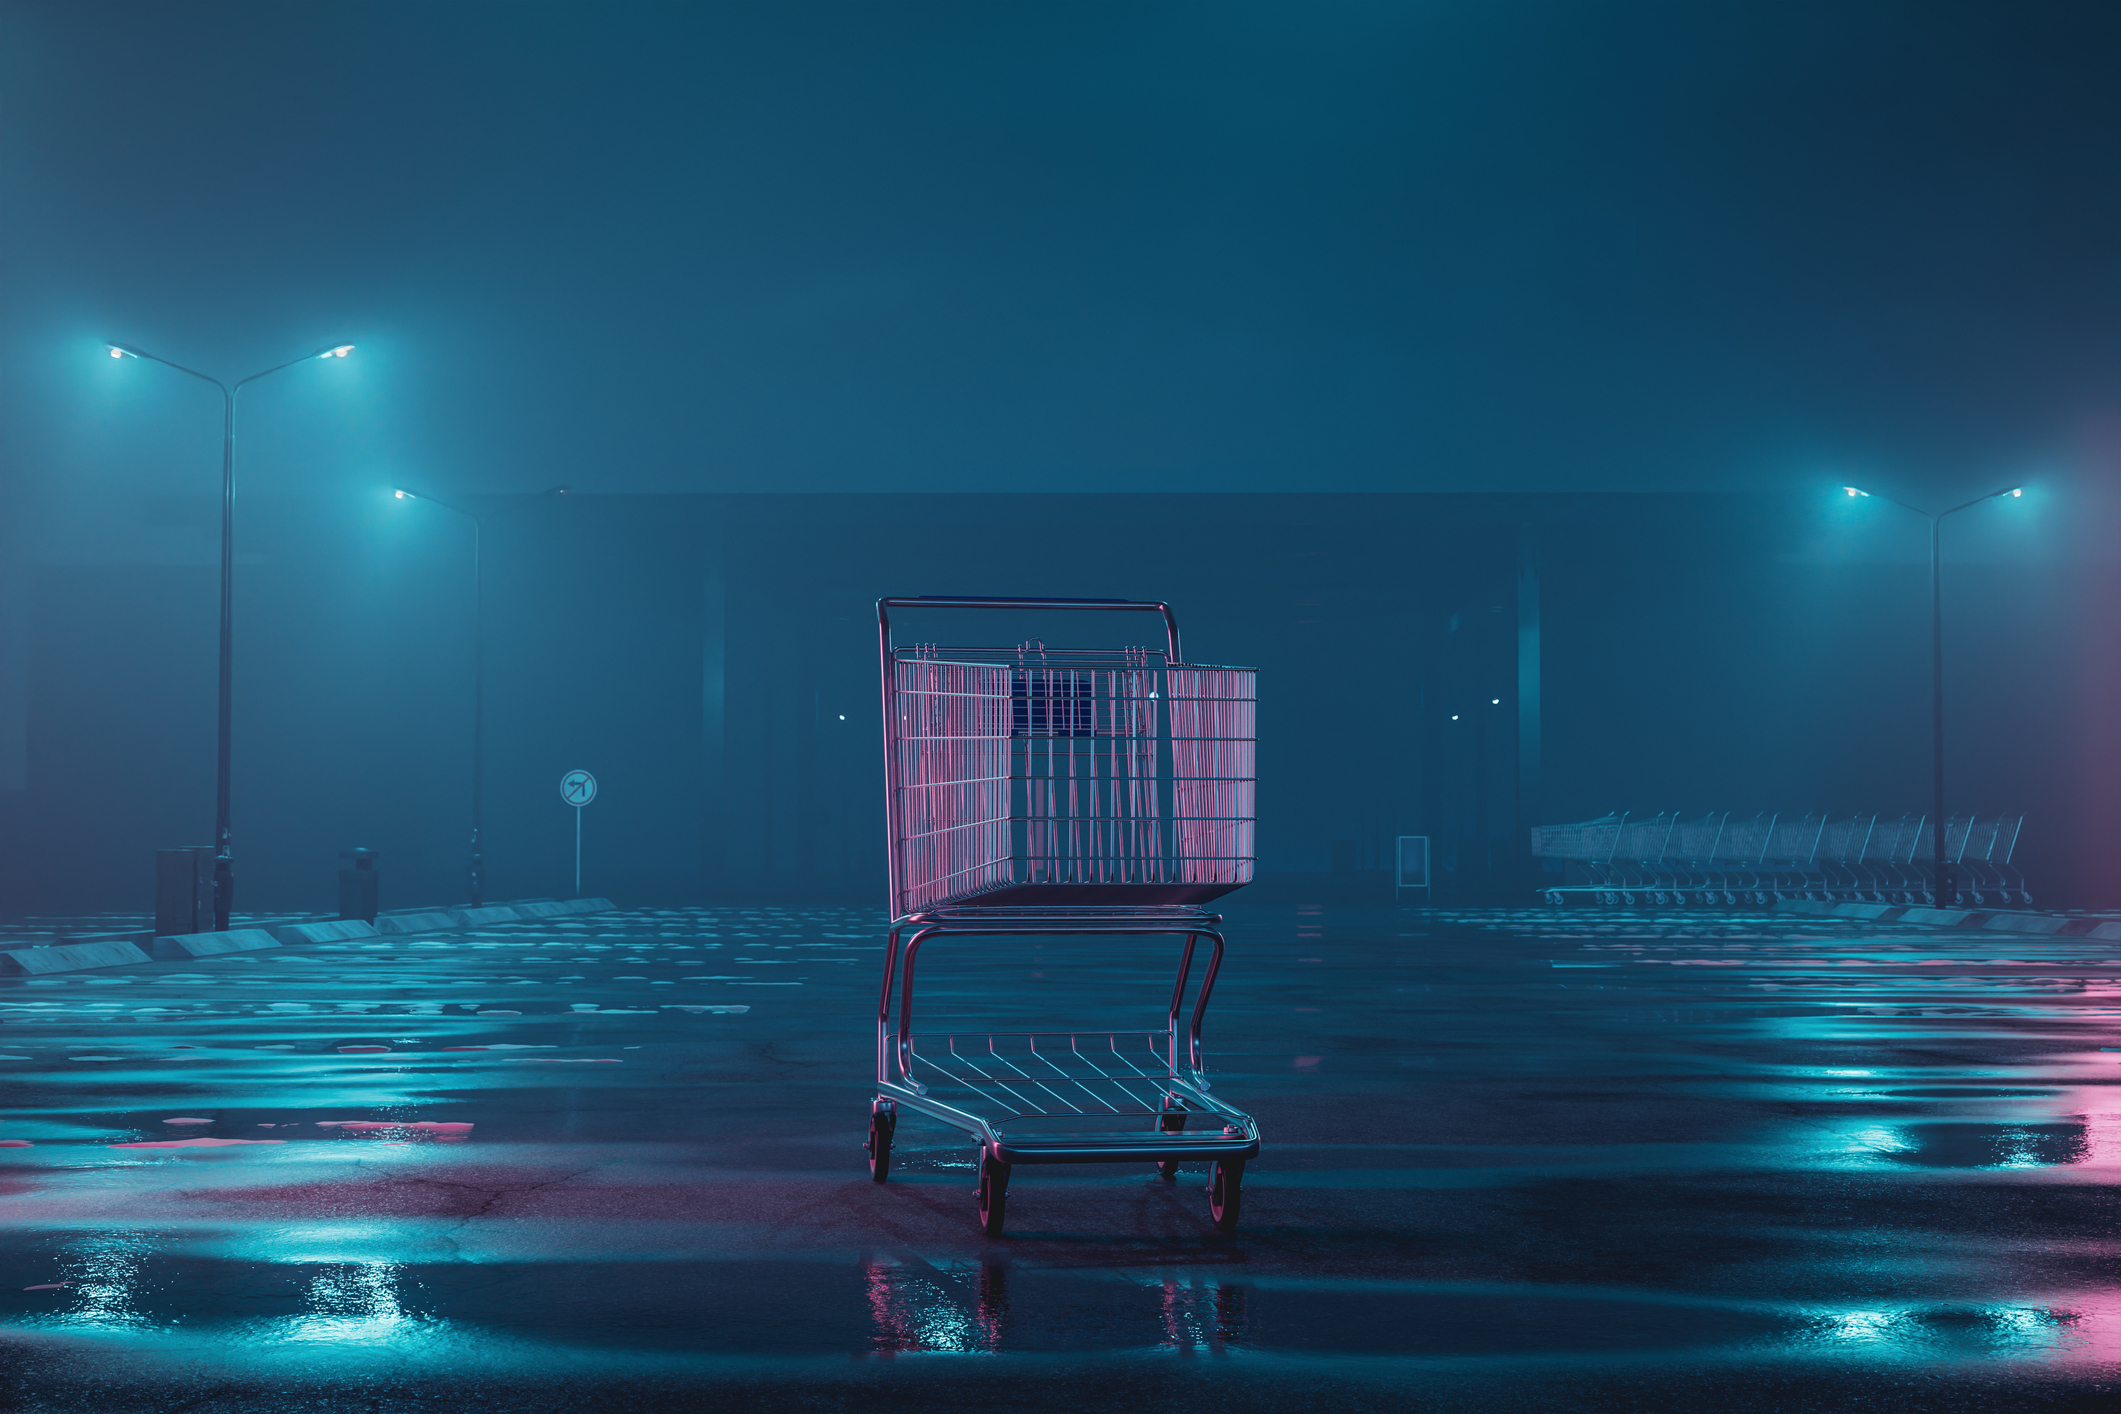 Empty shopping cart in a deserted parking lot at night